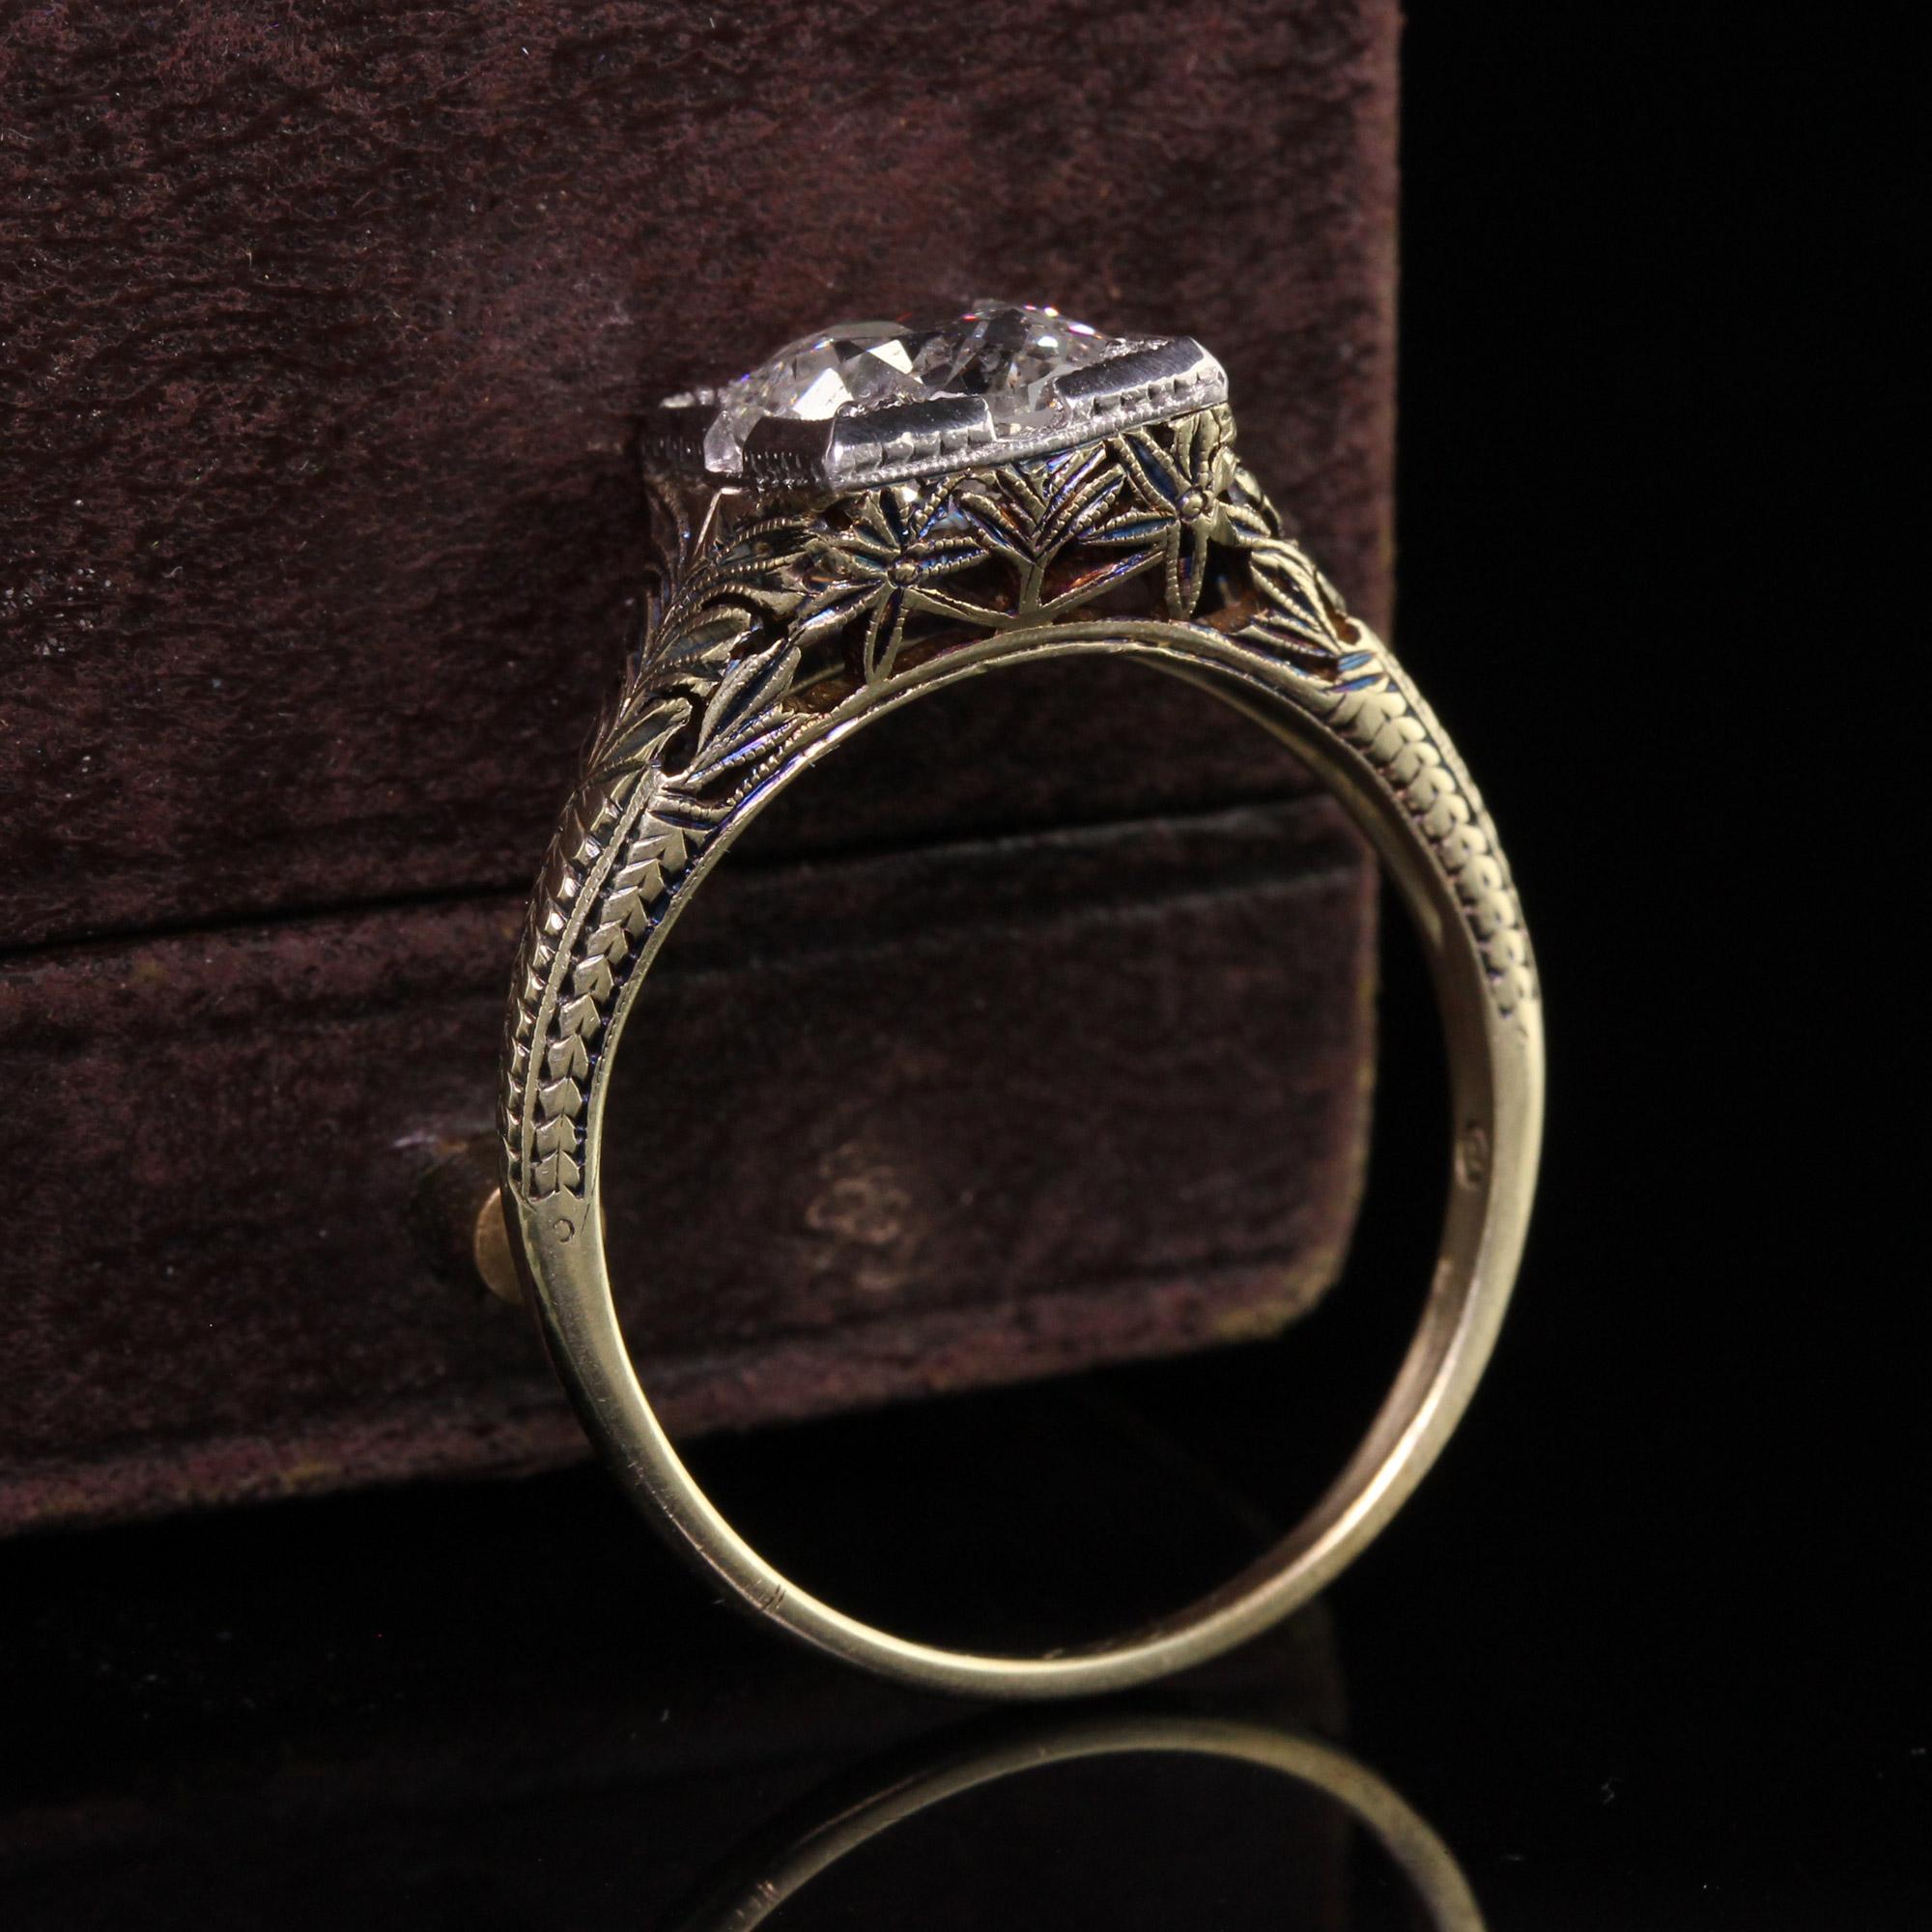 Antique Art Deco 14k Yellow Gold Filigree Old Euro Diamond Engagement Ring, GIA In Good Condition For Sale In Great Neck, NY